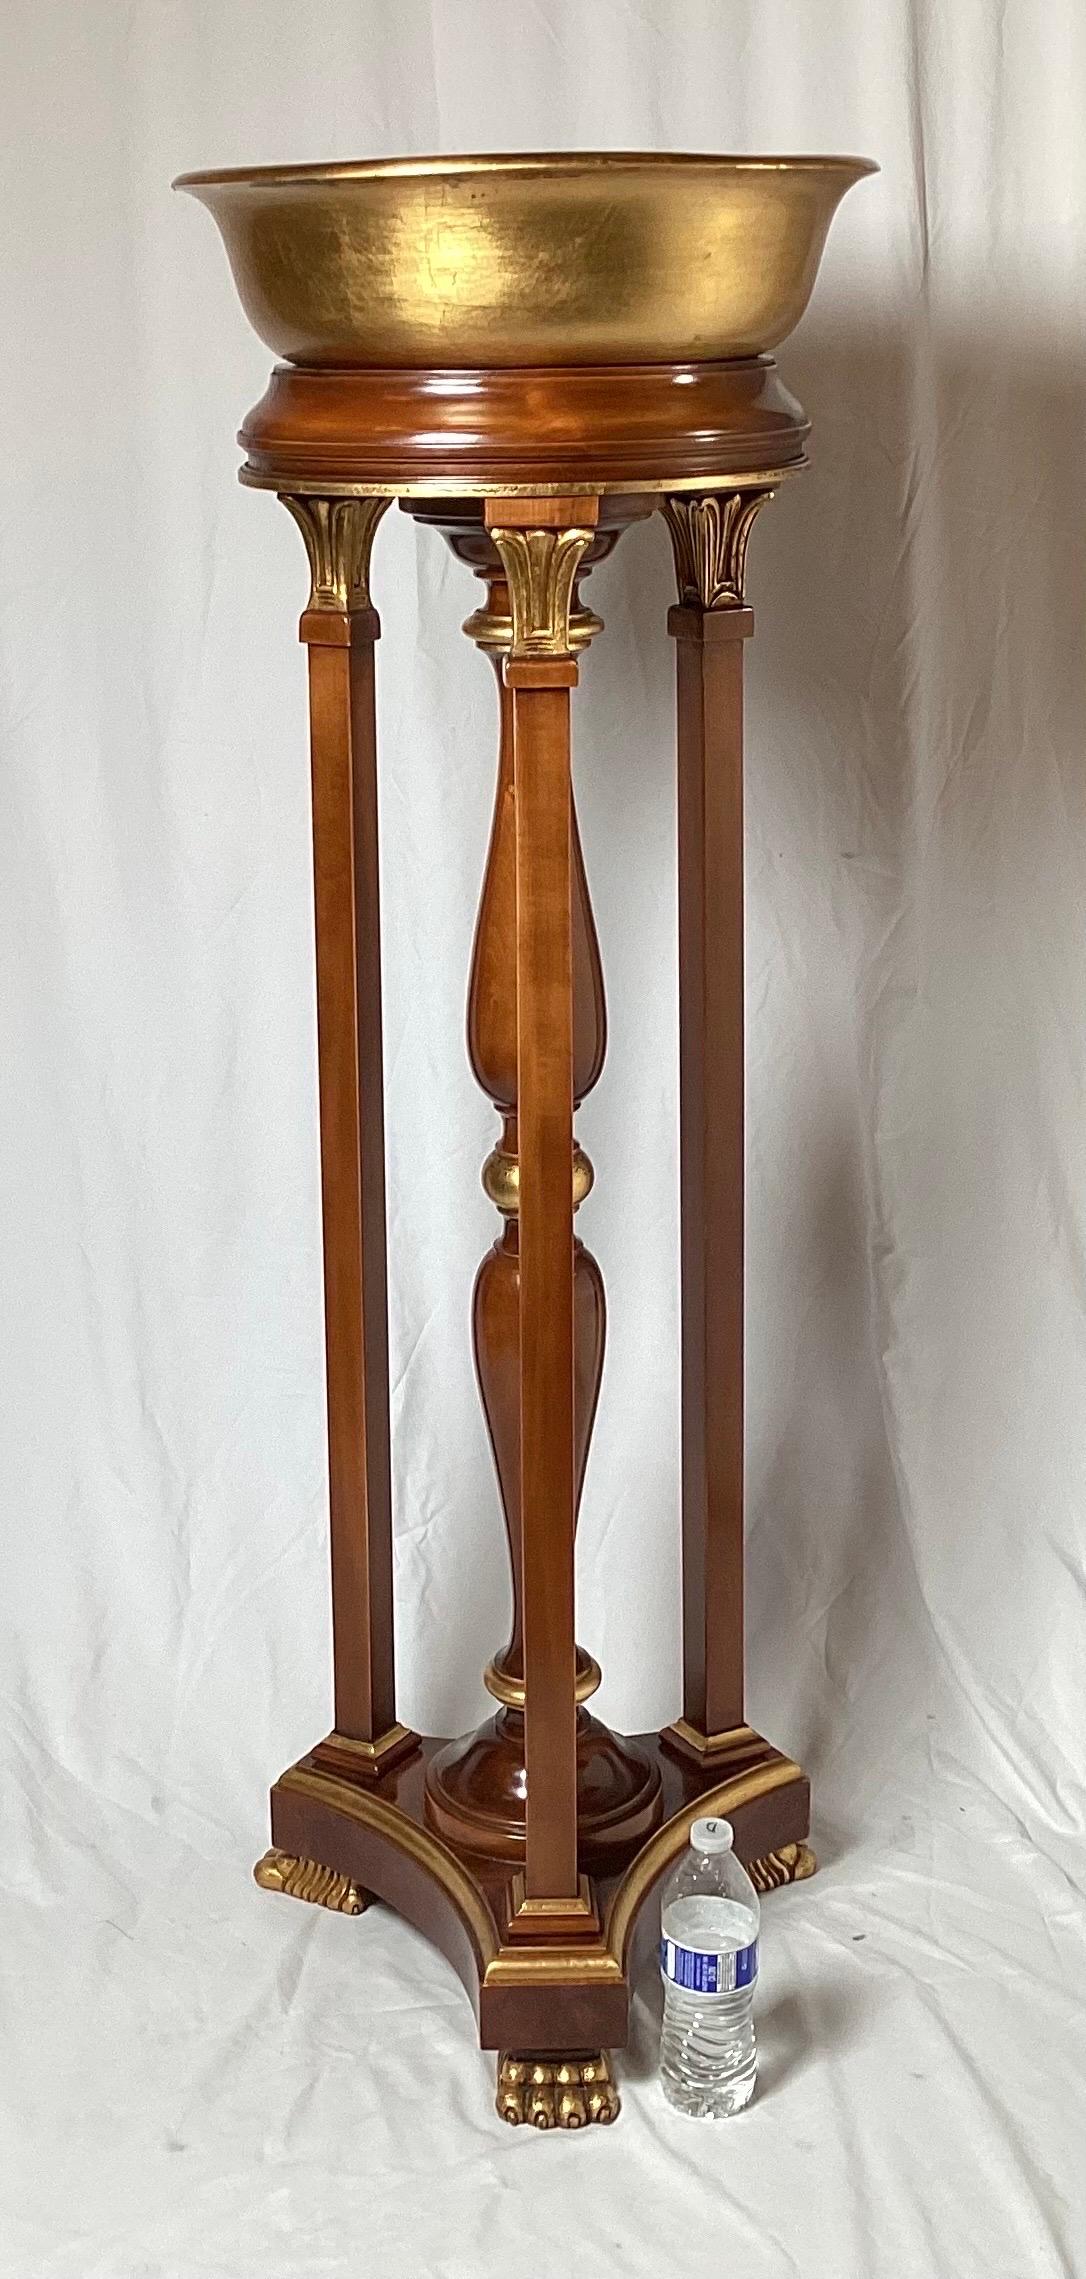 20th Century Vintage Mahogany Plant Stand with Gold Accents For Sale